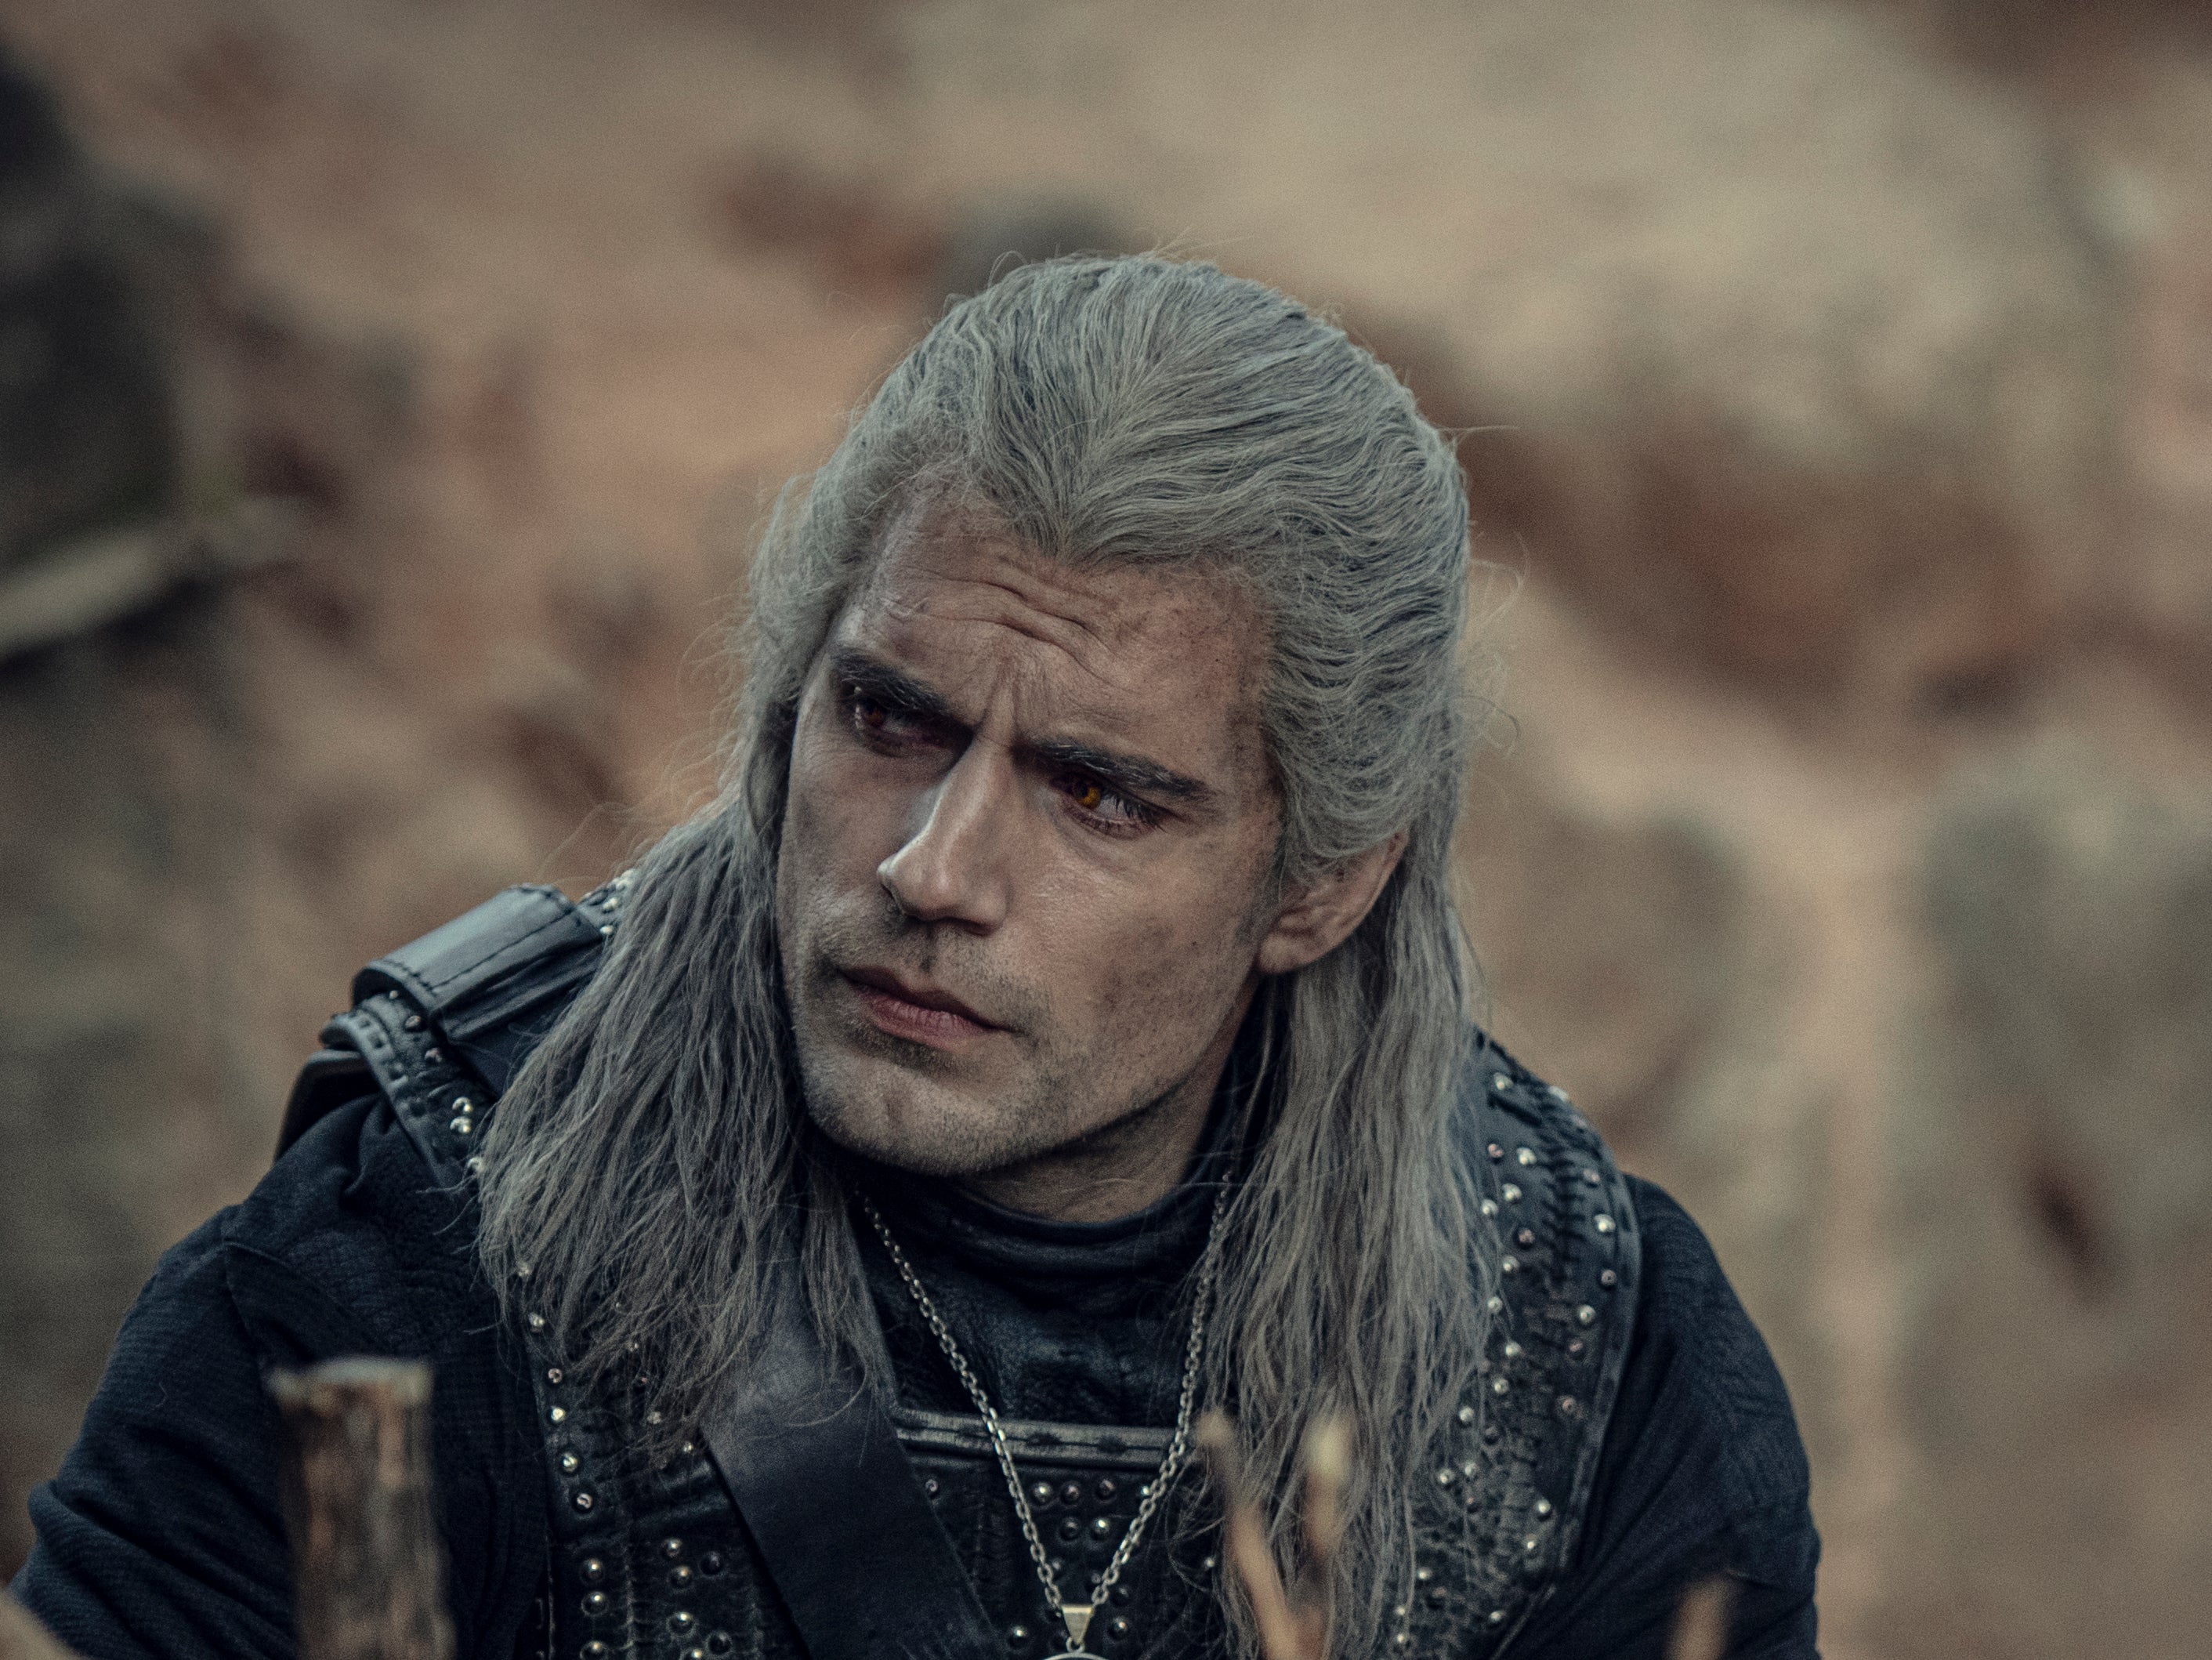 The Witcher review: Netflix's series is one of the year's best shows